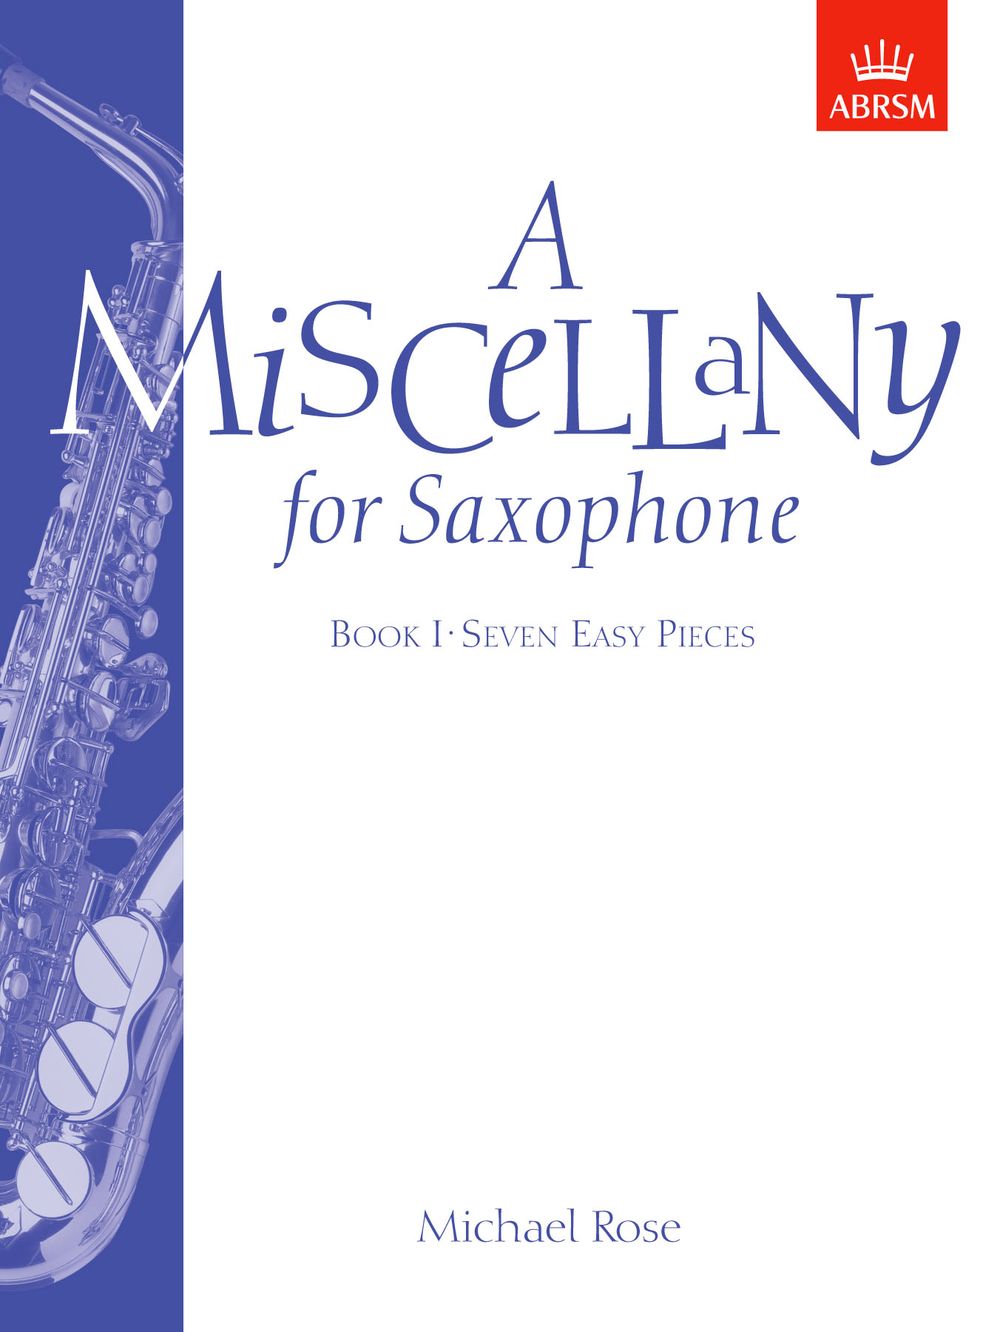 Michael Rose: A Miscellany for Saxophone  Book I: Saxophone: Instrumental Album